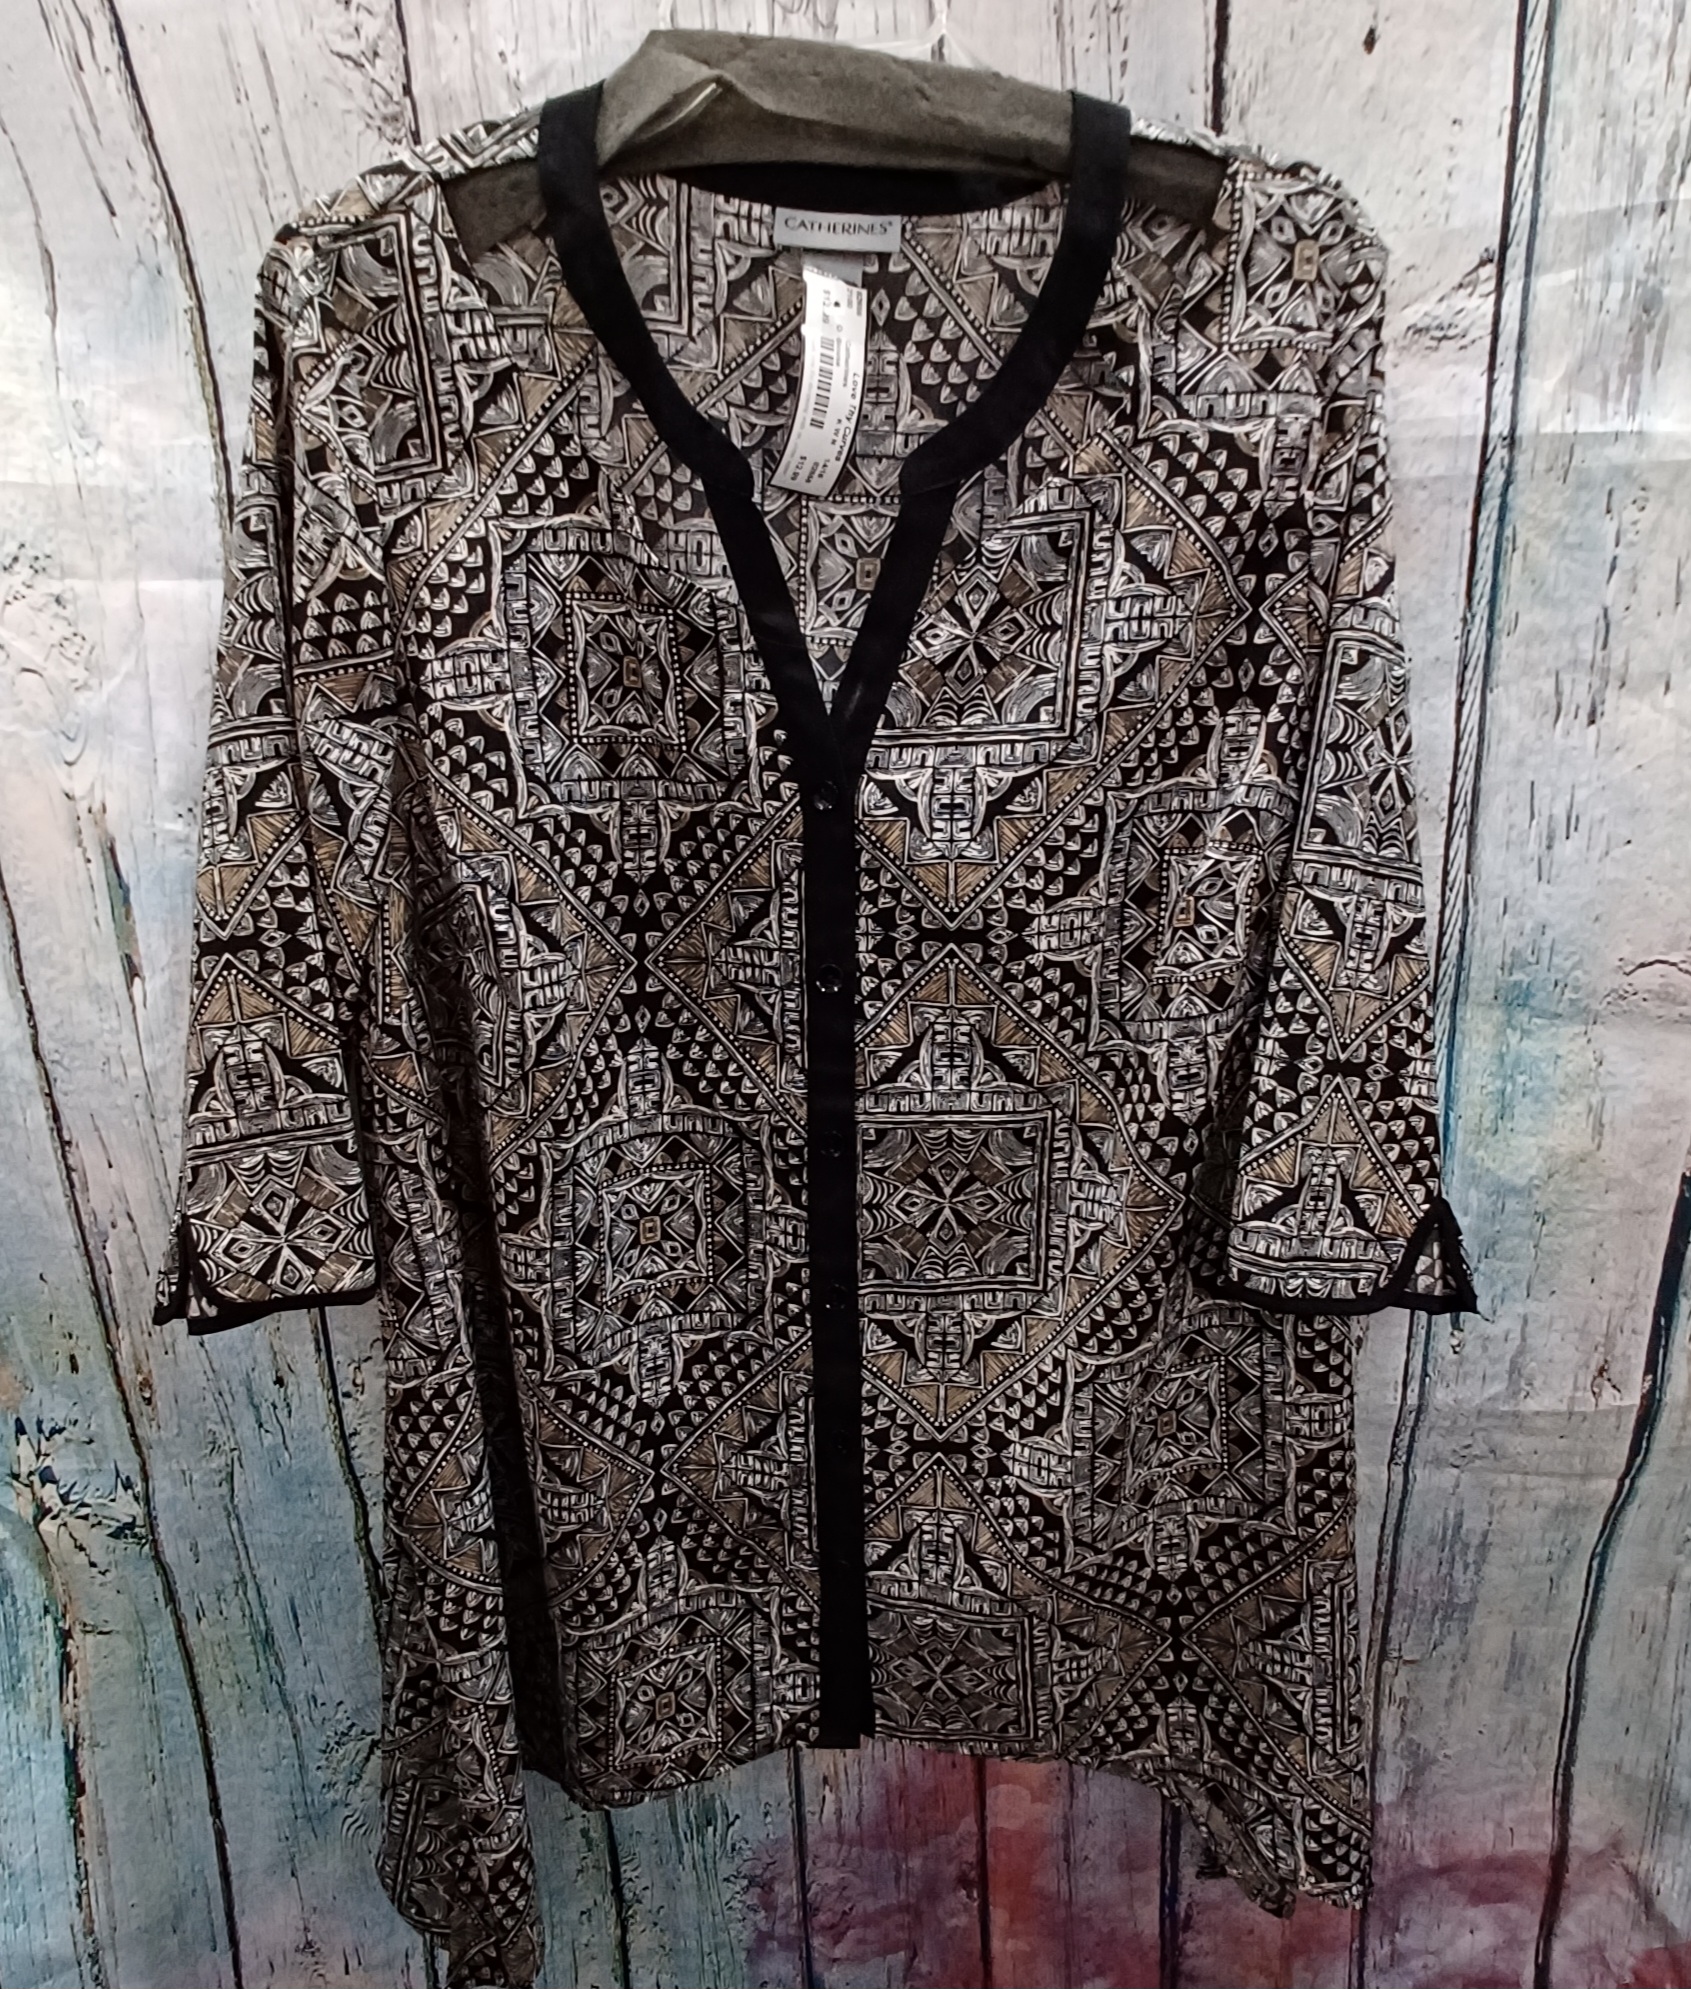 Long tunic style blouse with a half sleeve and button up front done in black, white and tan pattern.